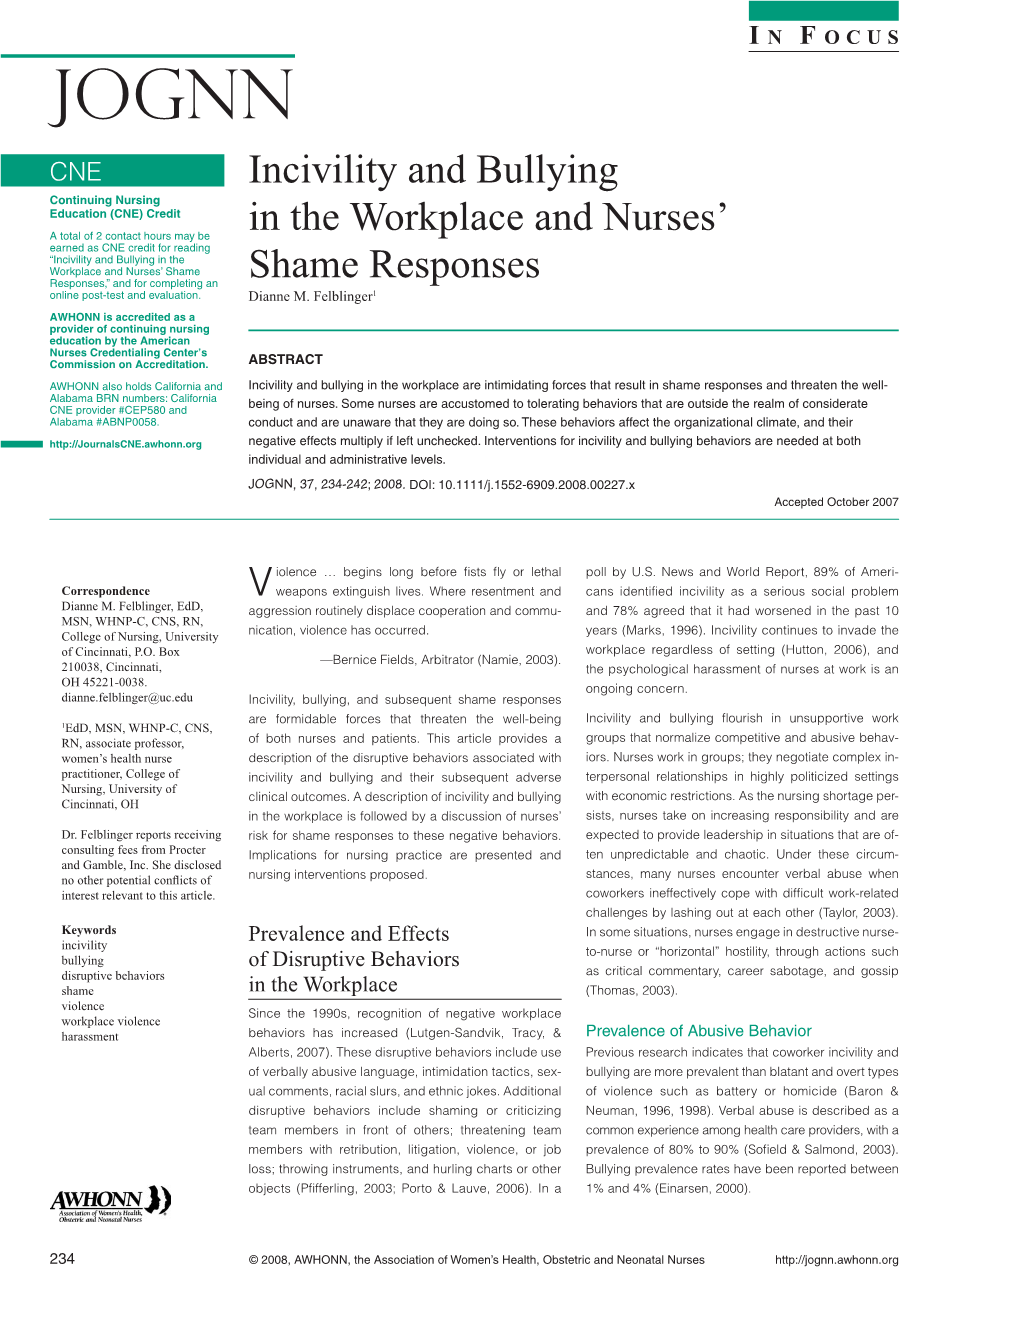 Incivility and Bullying in the Workplace and Nurses' Shame Responses